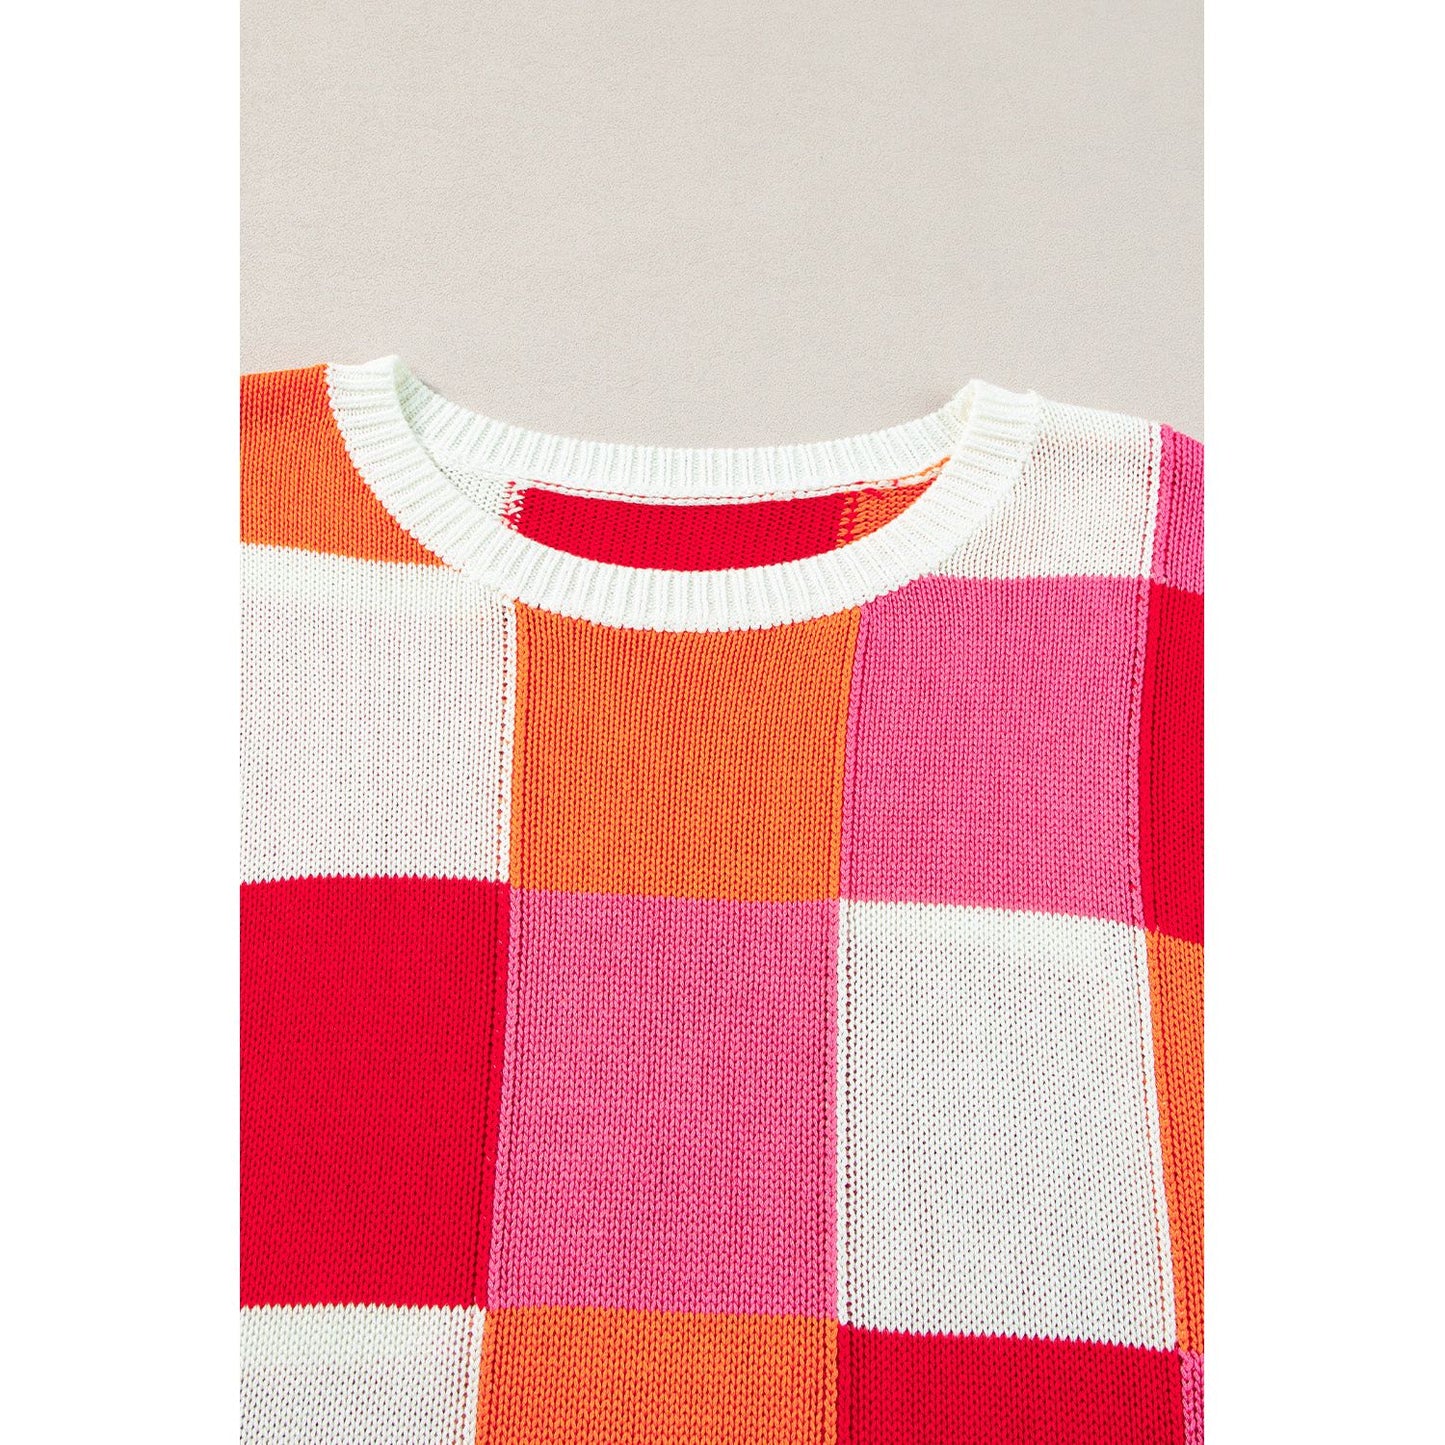 Fiery Red Color Block Cap Sleeve Sweater